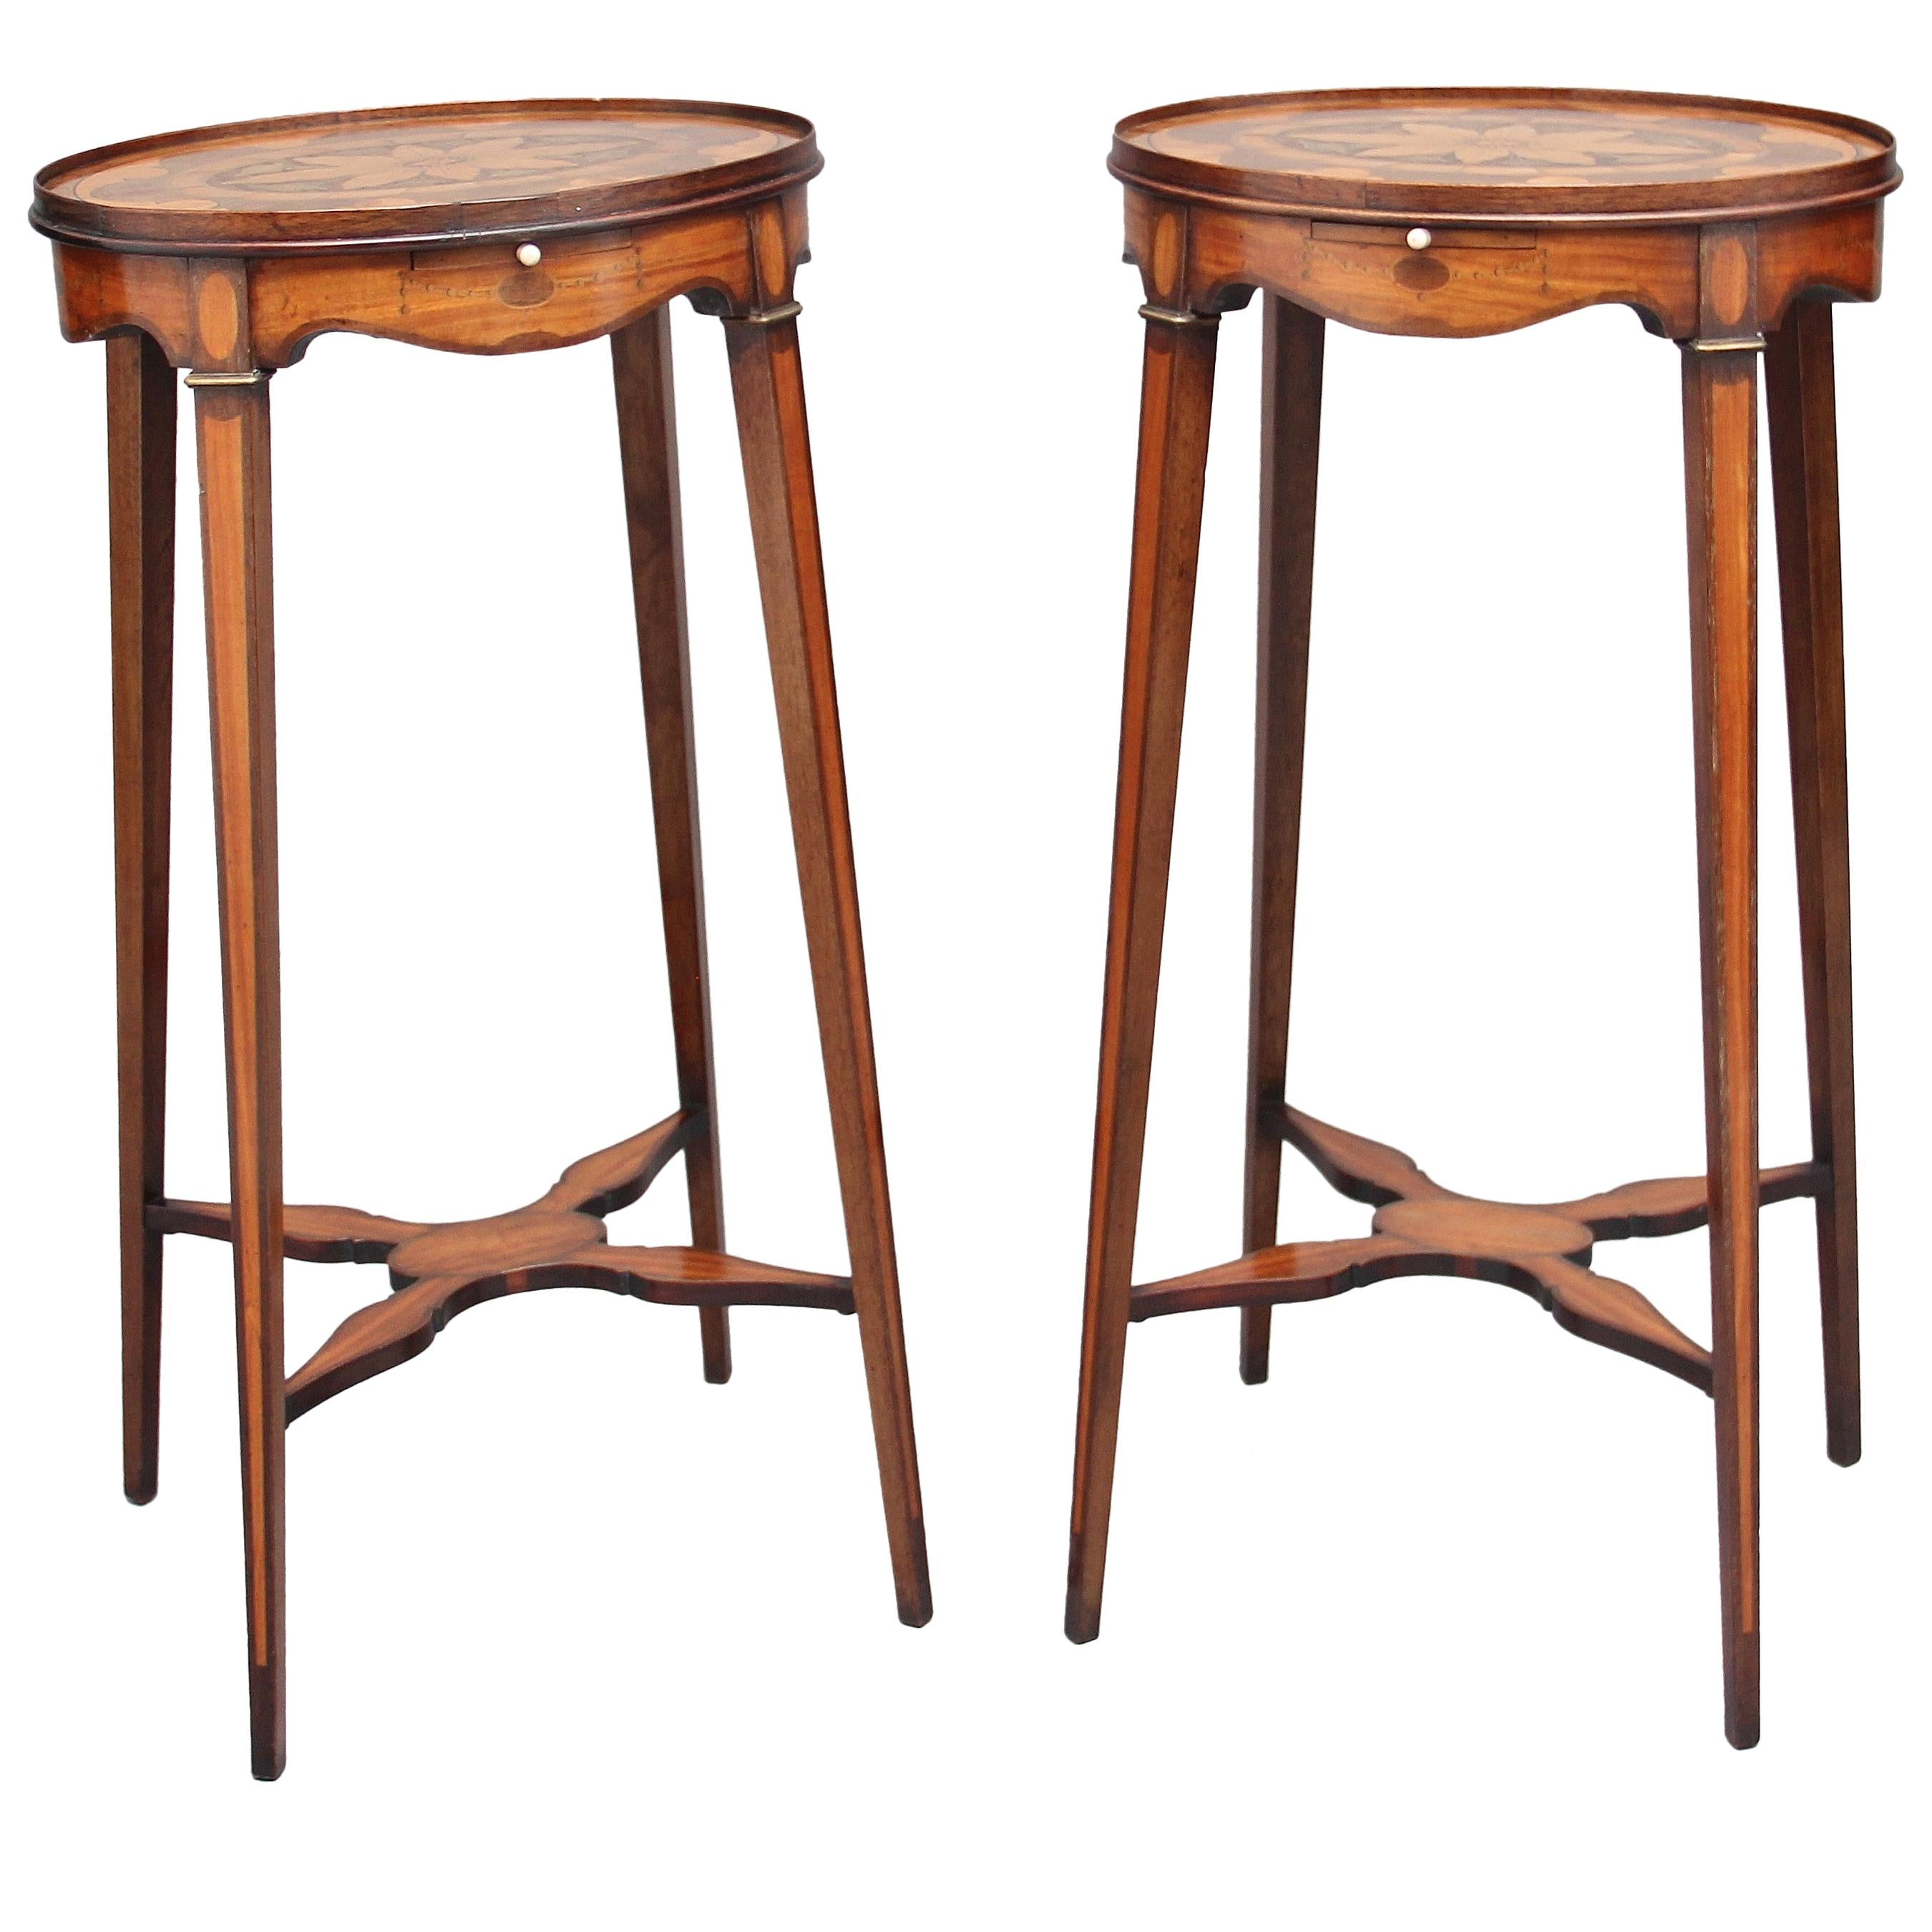 Pair of Sheraton Revival Mahogany and Inlaid Urn Stands